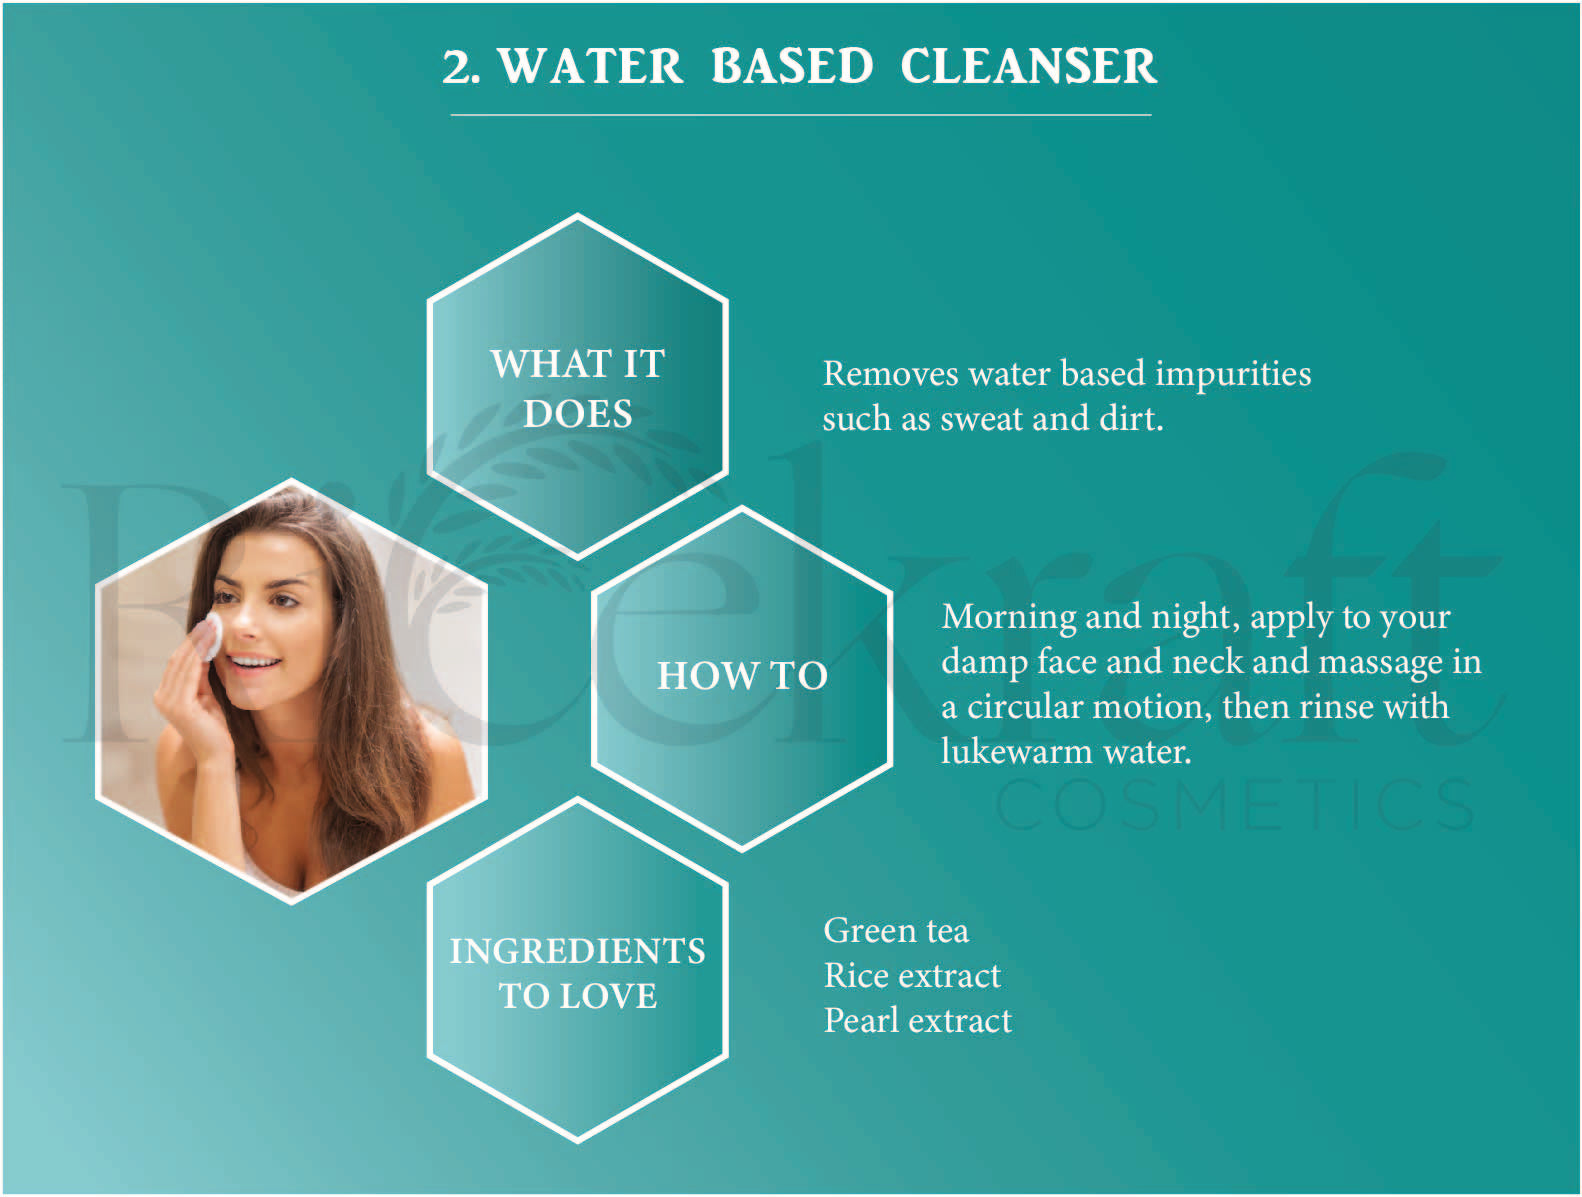 Water-based cleanser: Removes sweat and dirt. How to use: Apply to damp face and neck, massage, rinse. Ingredients: Green tea, Rice extract, Pearl extract."